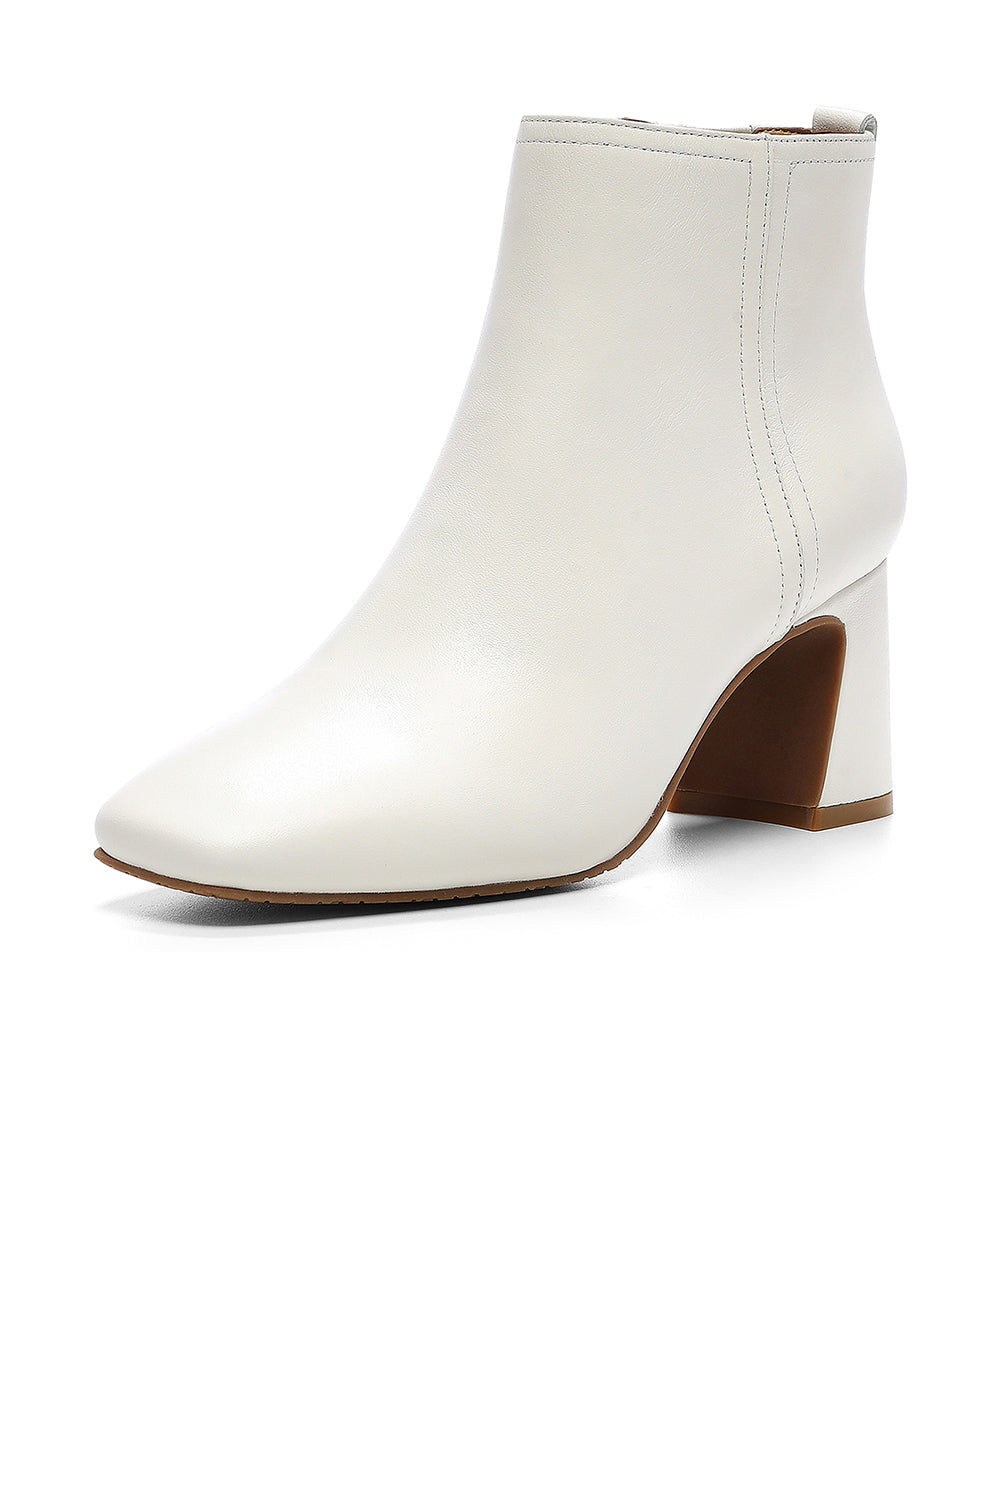 NYDJ Cheree Booties In Nappa Leather - Off White